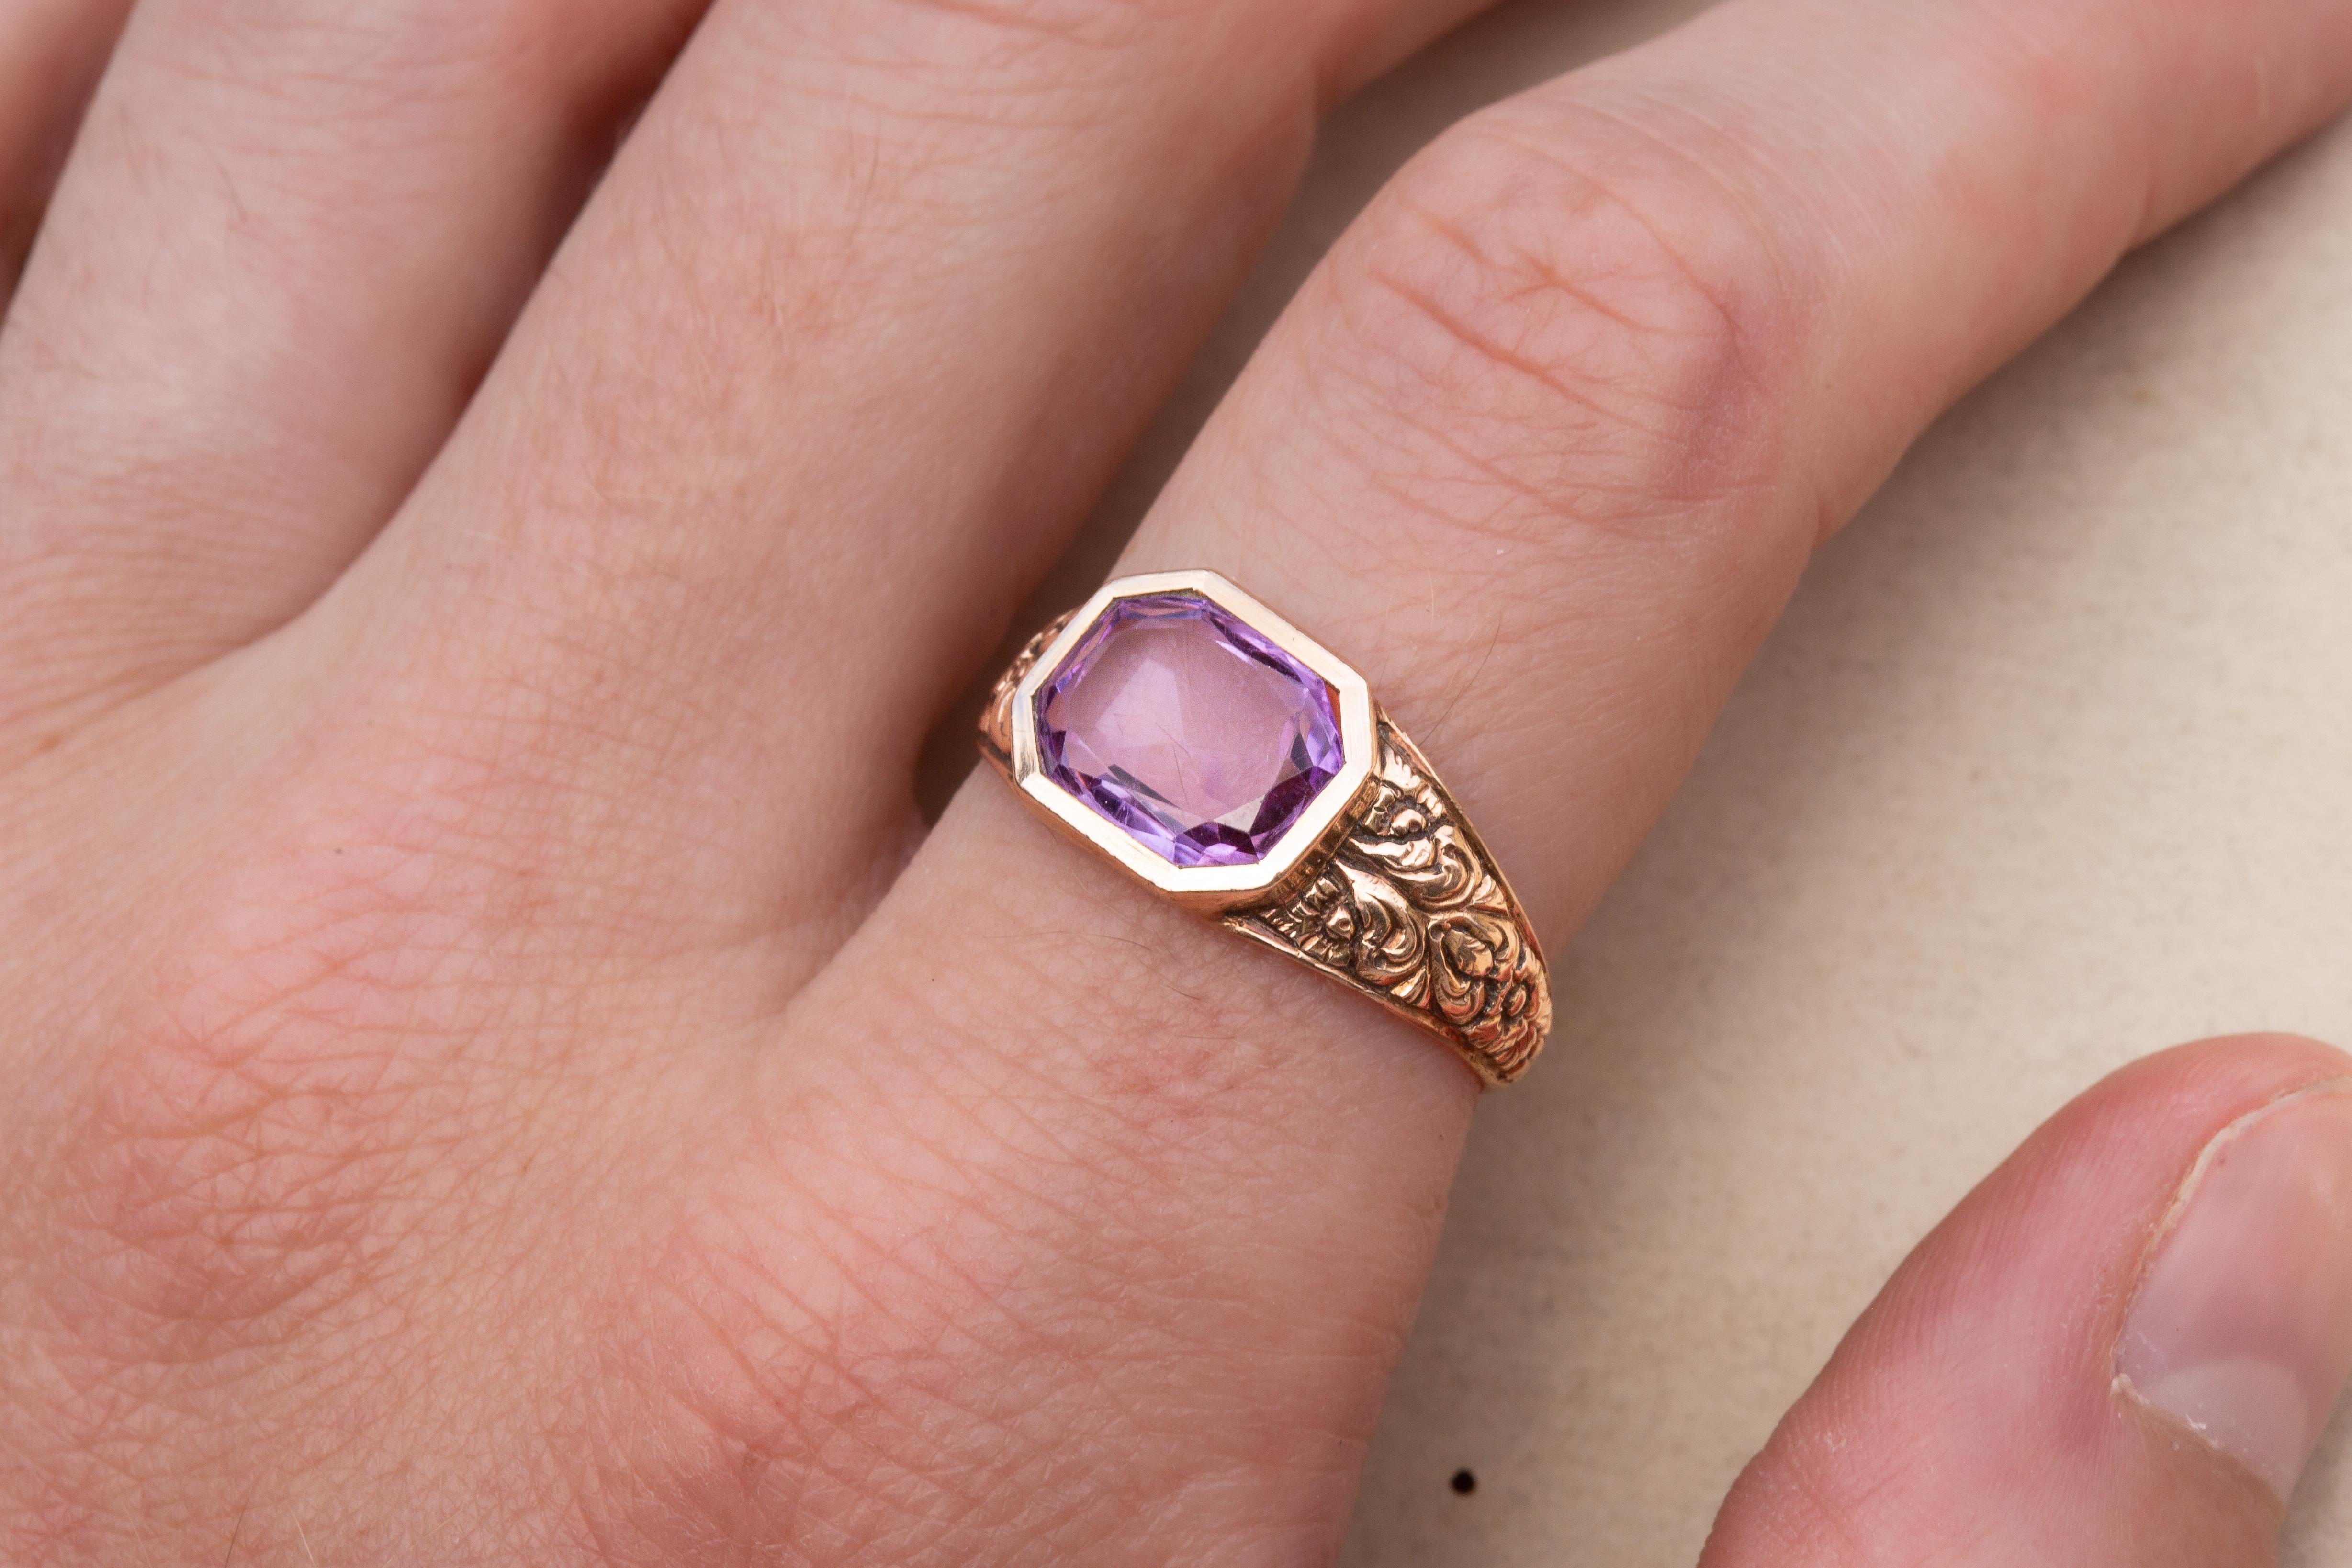 Stunning Antique Victorian 19th Century 14k Gold and Amethyst Ring 7